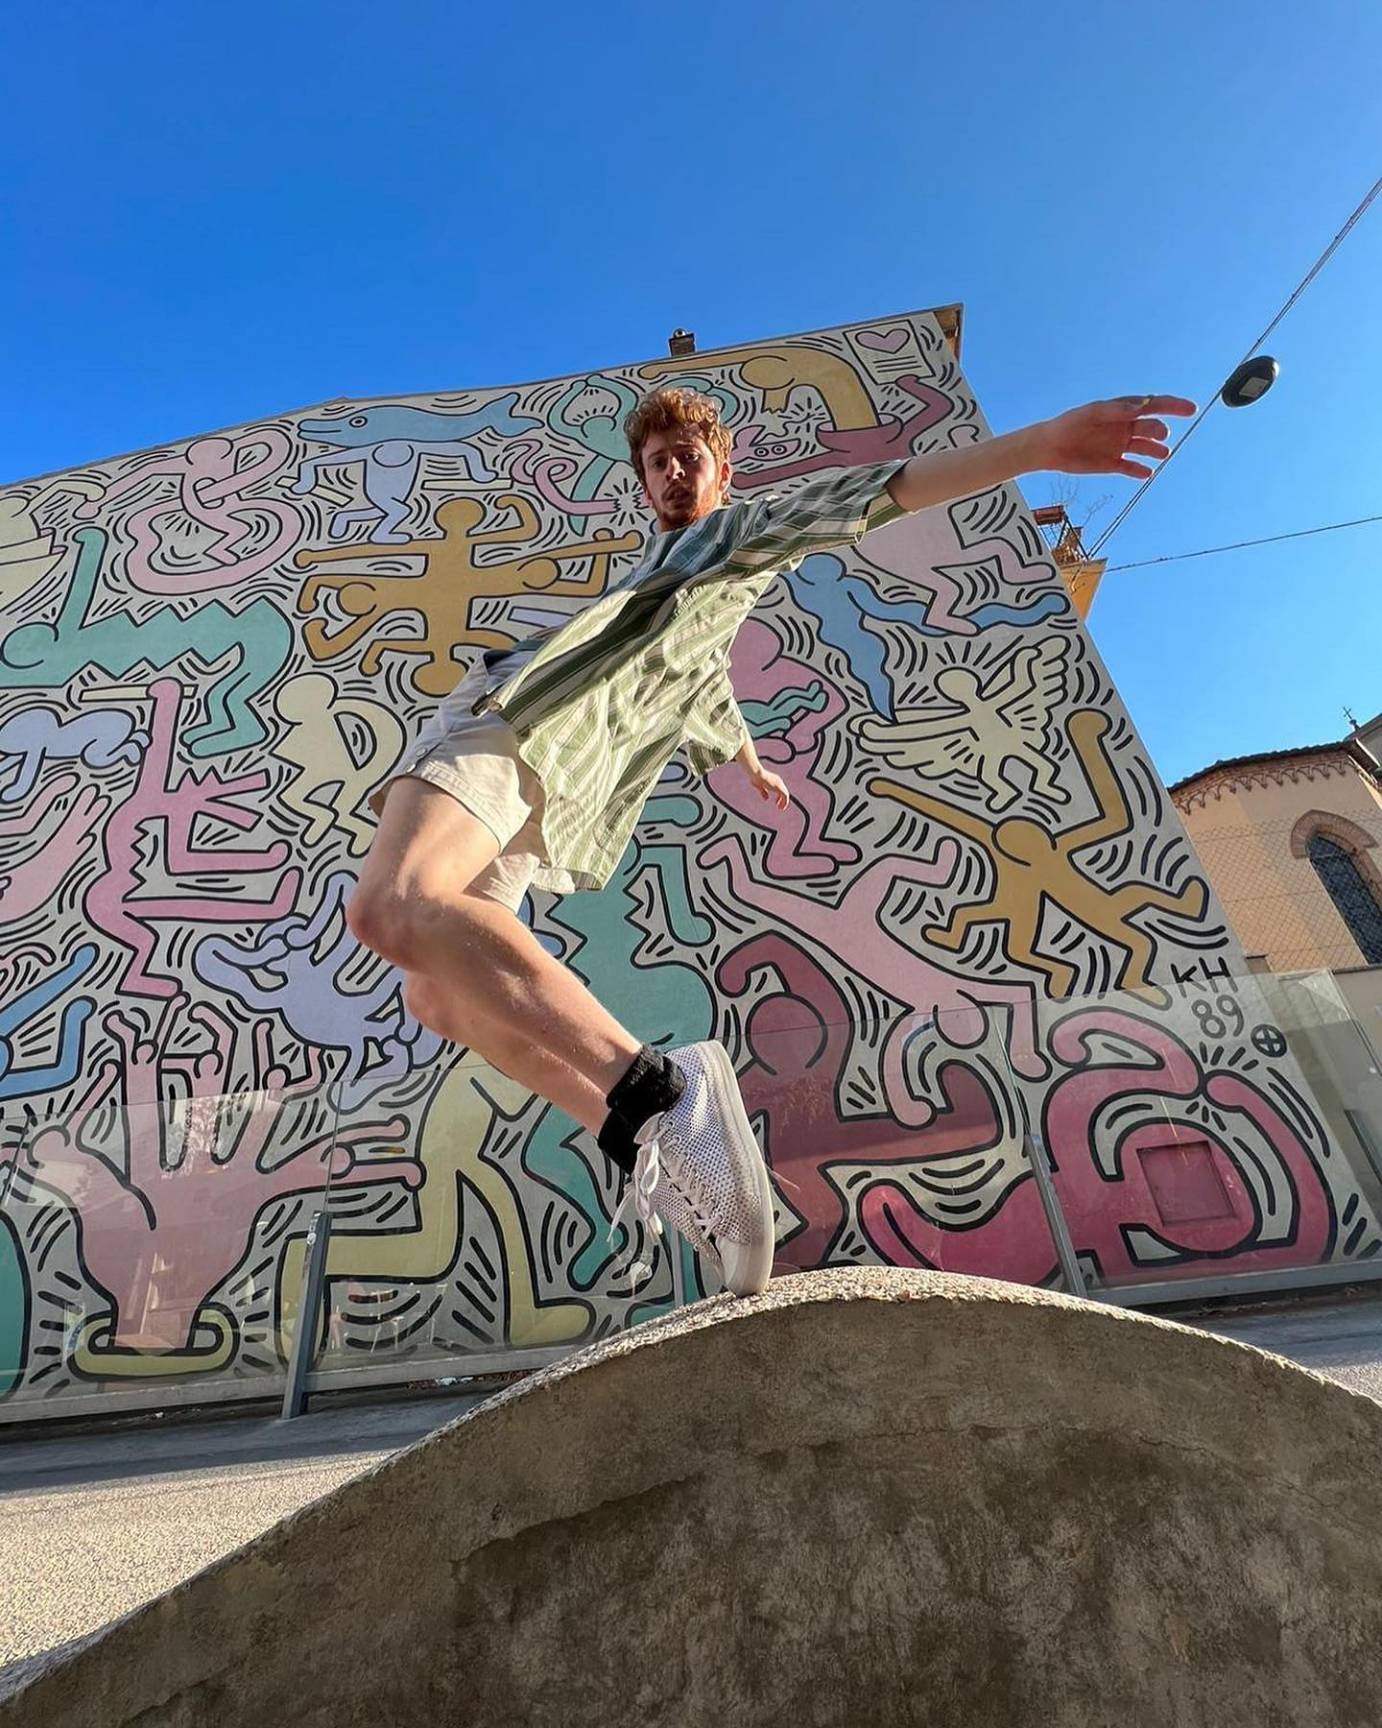 young teen fair skinned male dancer with curly light hair and a beard and mustache. He wears light shorts and a green and white striped top as he dances in front of the Keith Haring mural